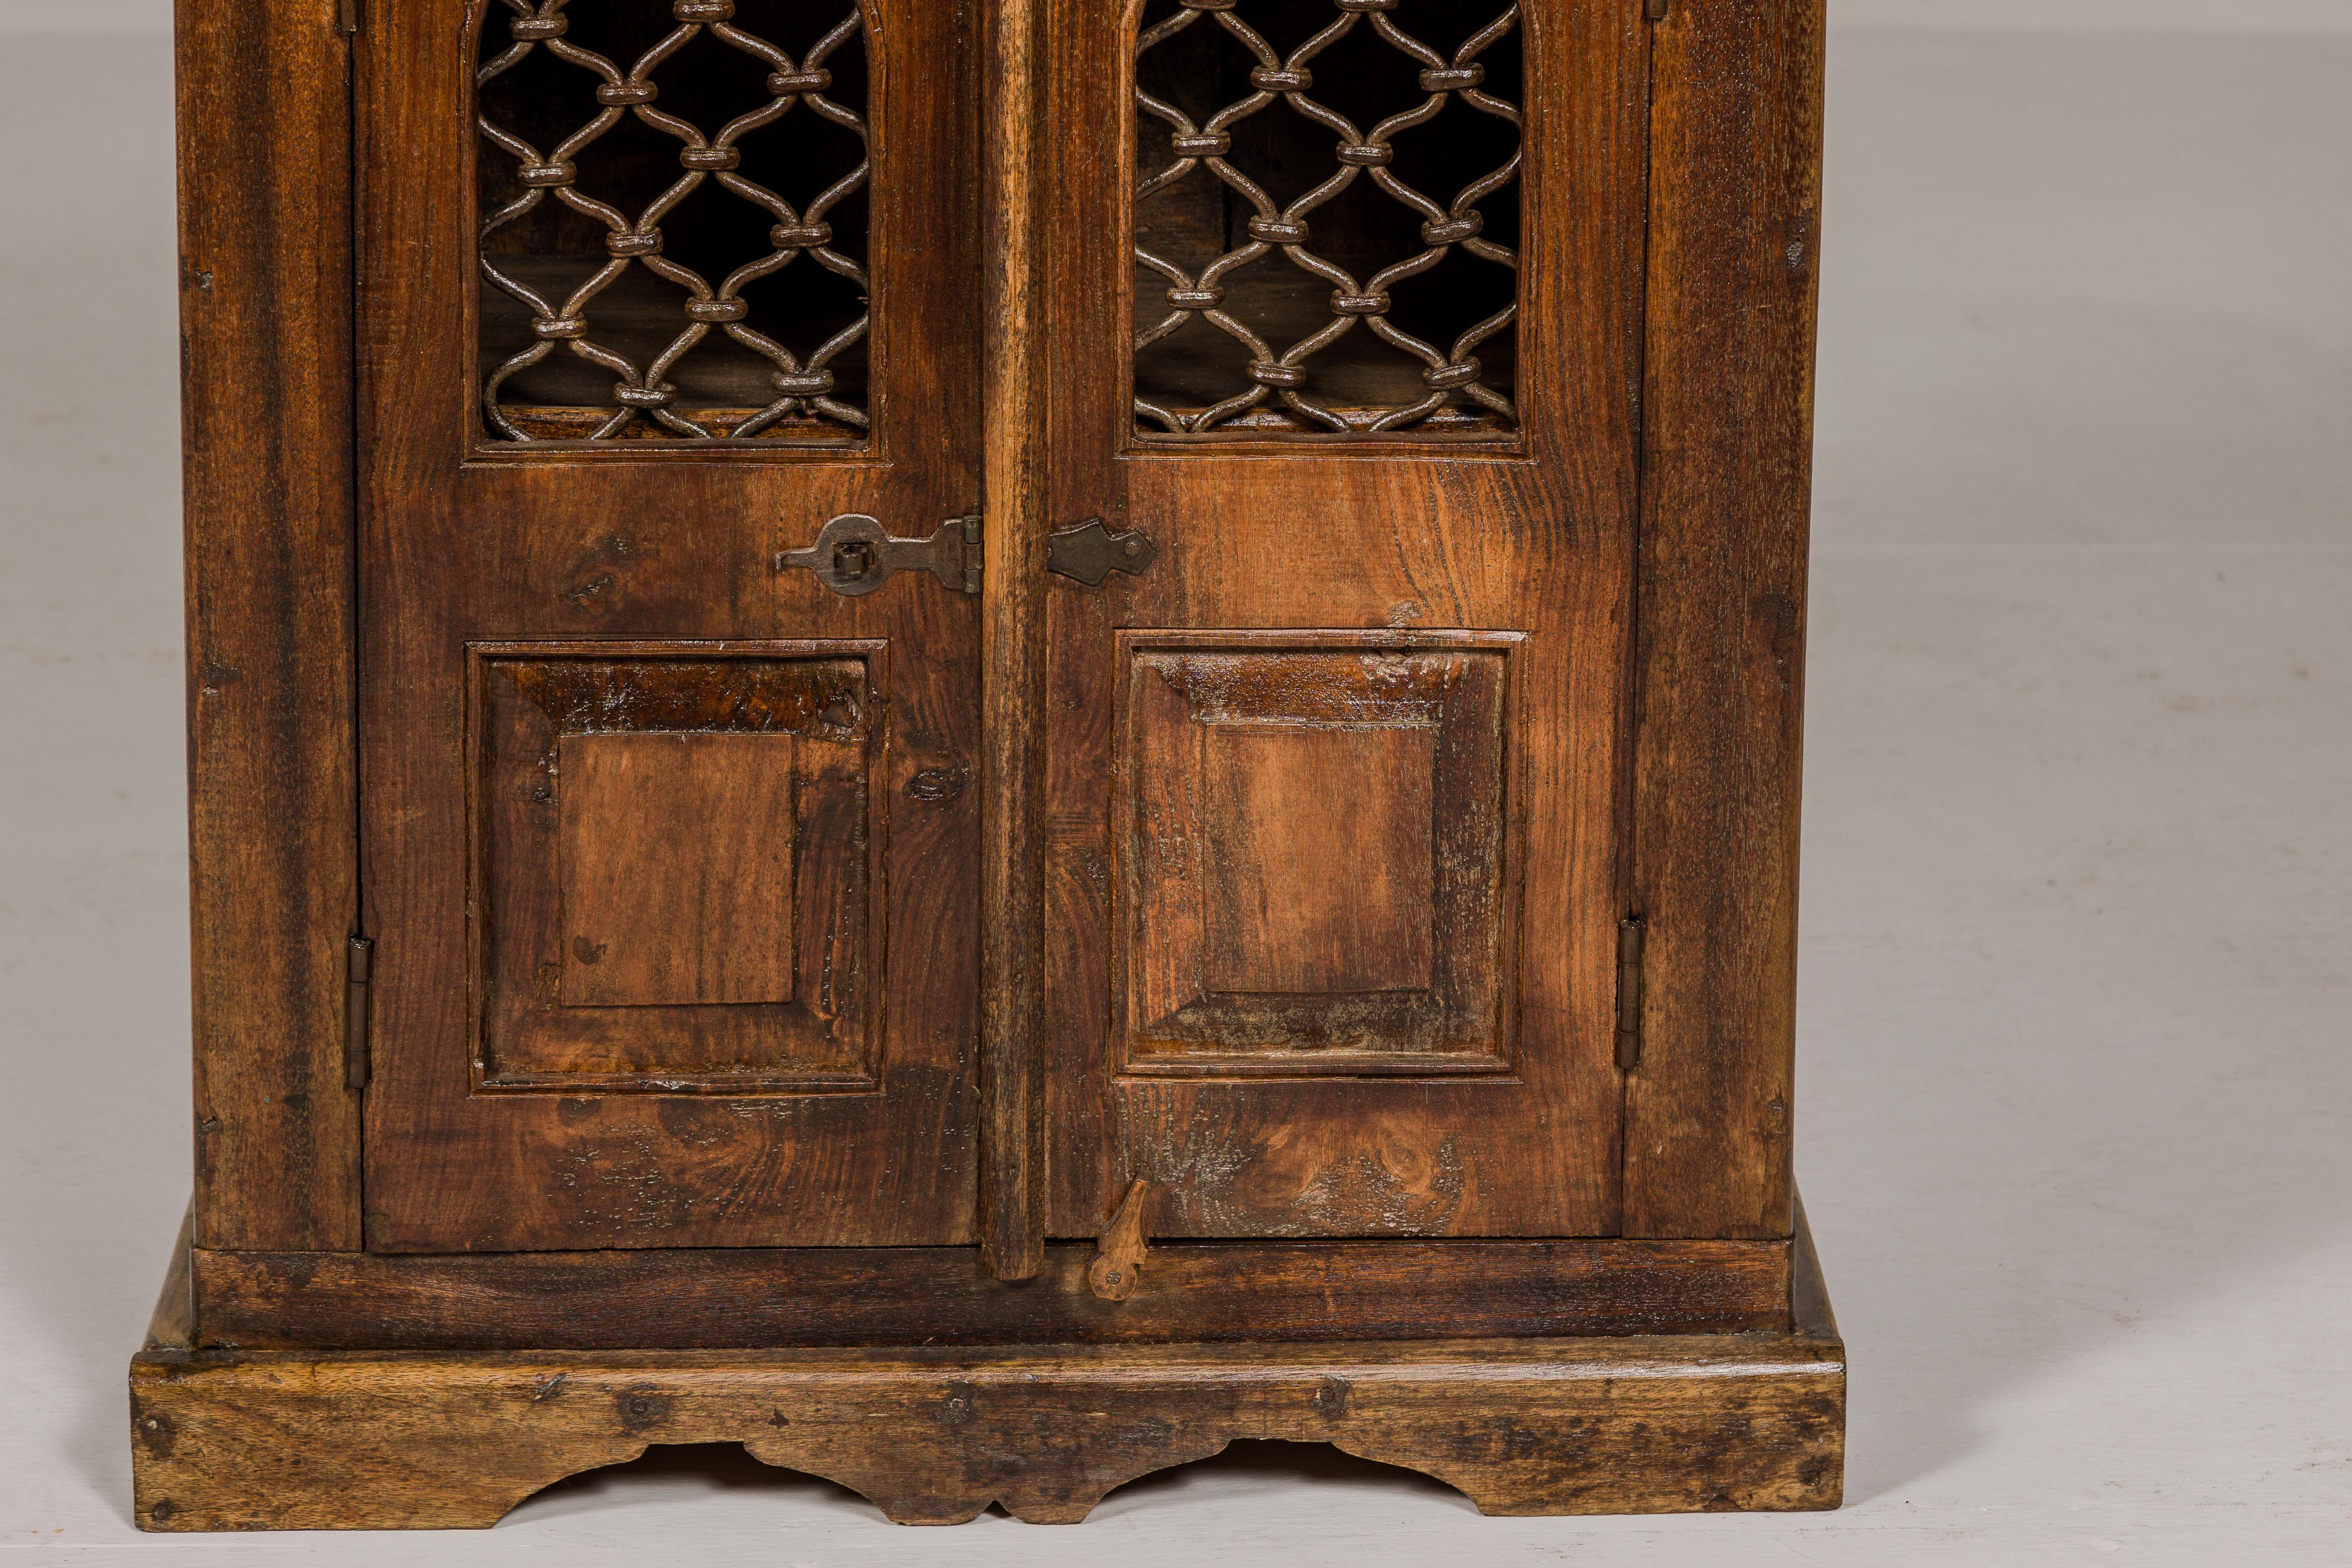 Indian 19th Century Wooden Side Cabinet with Arched Metal Grate Window Door For Sale 2